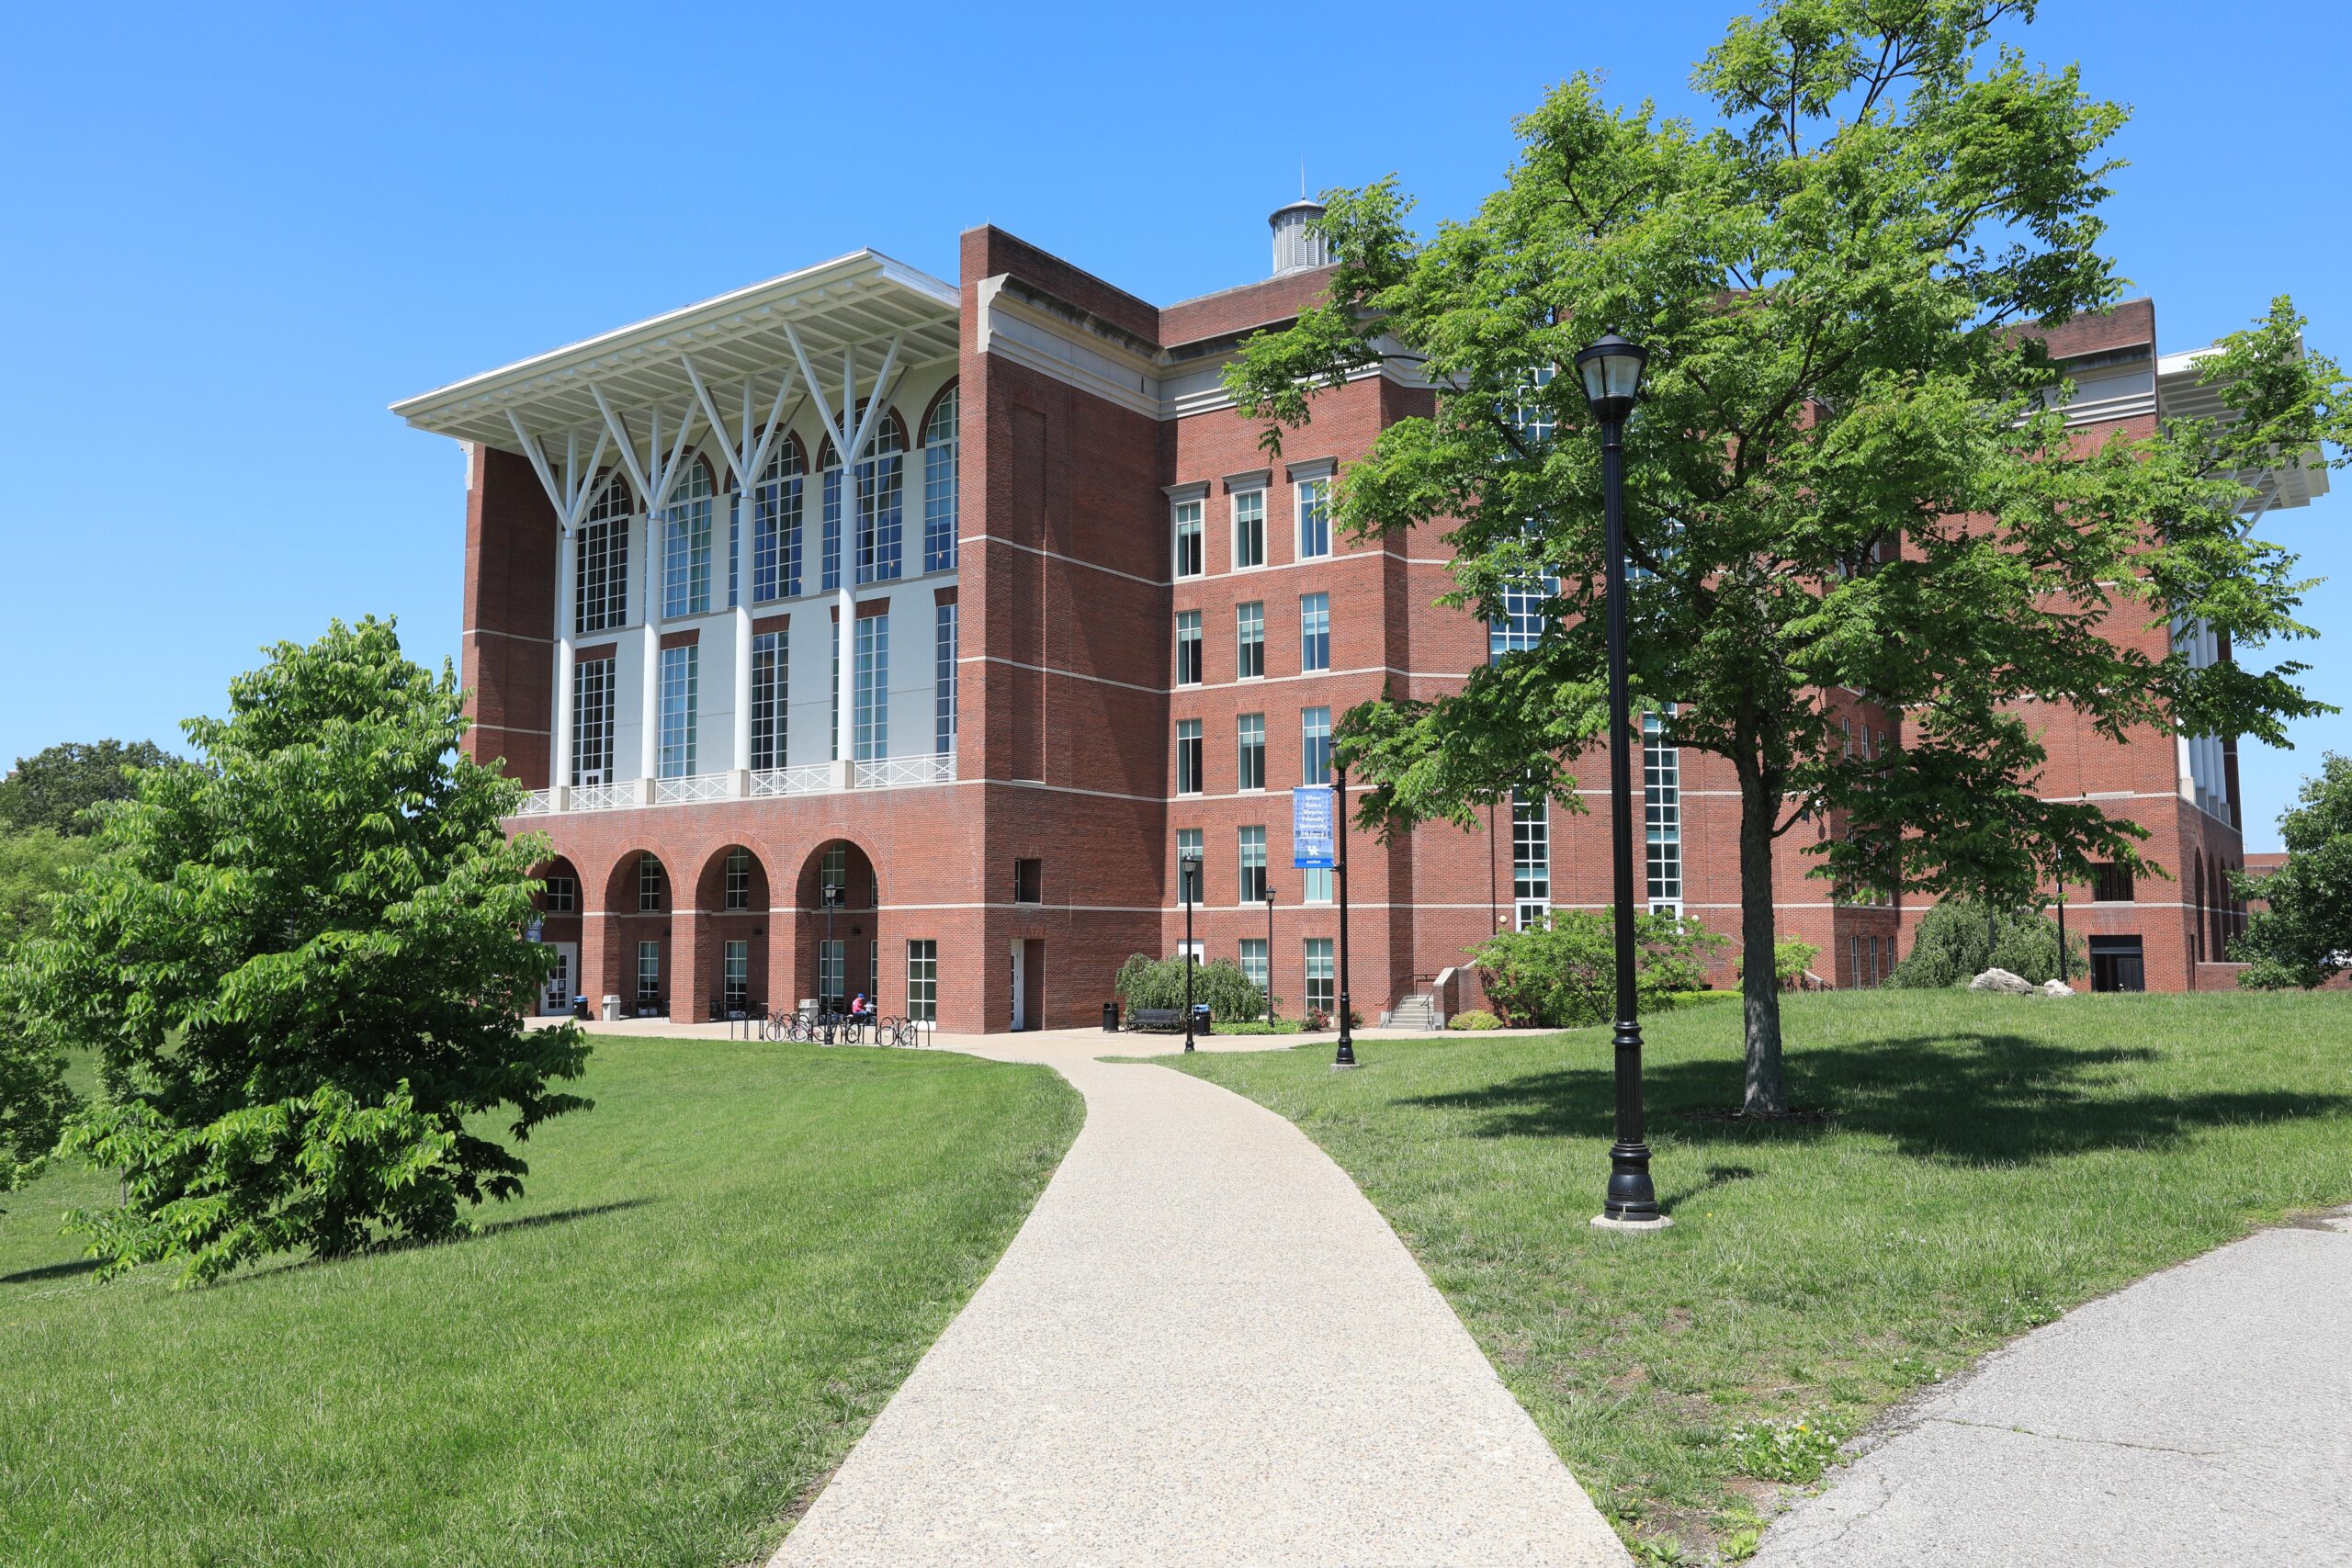 photo of the William T. Young library on the campus of the University of Kentucky, U.S.